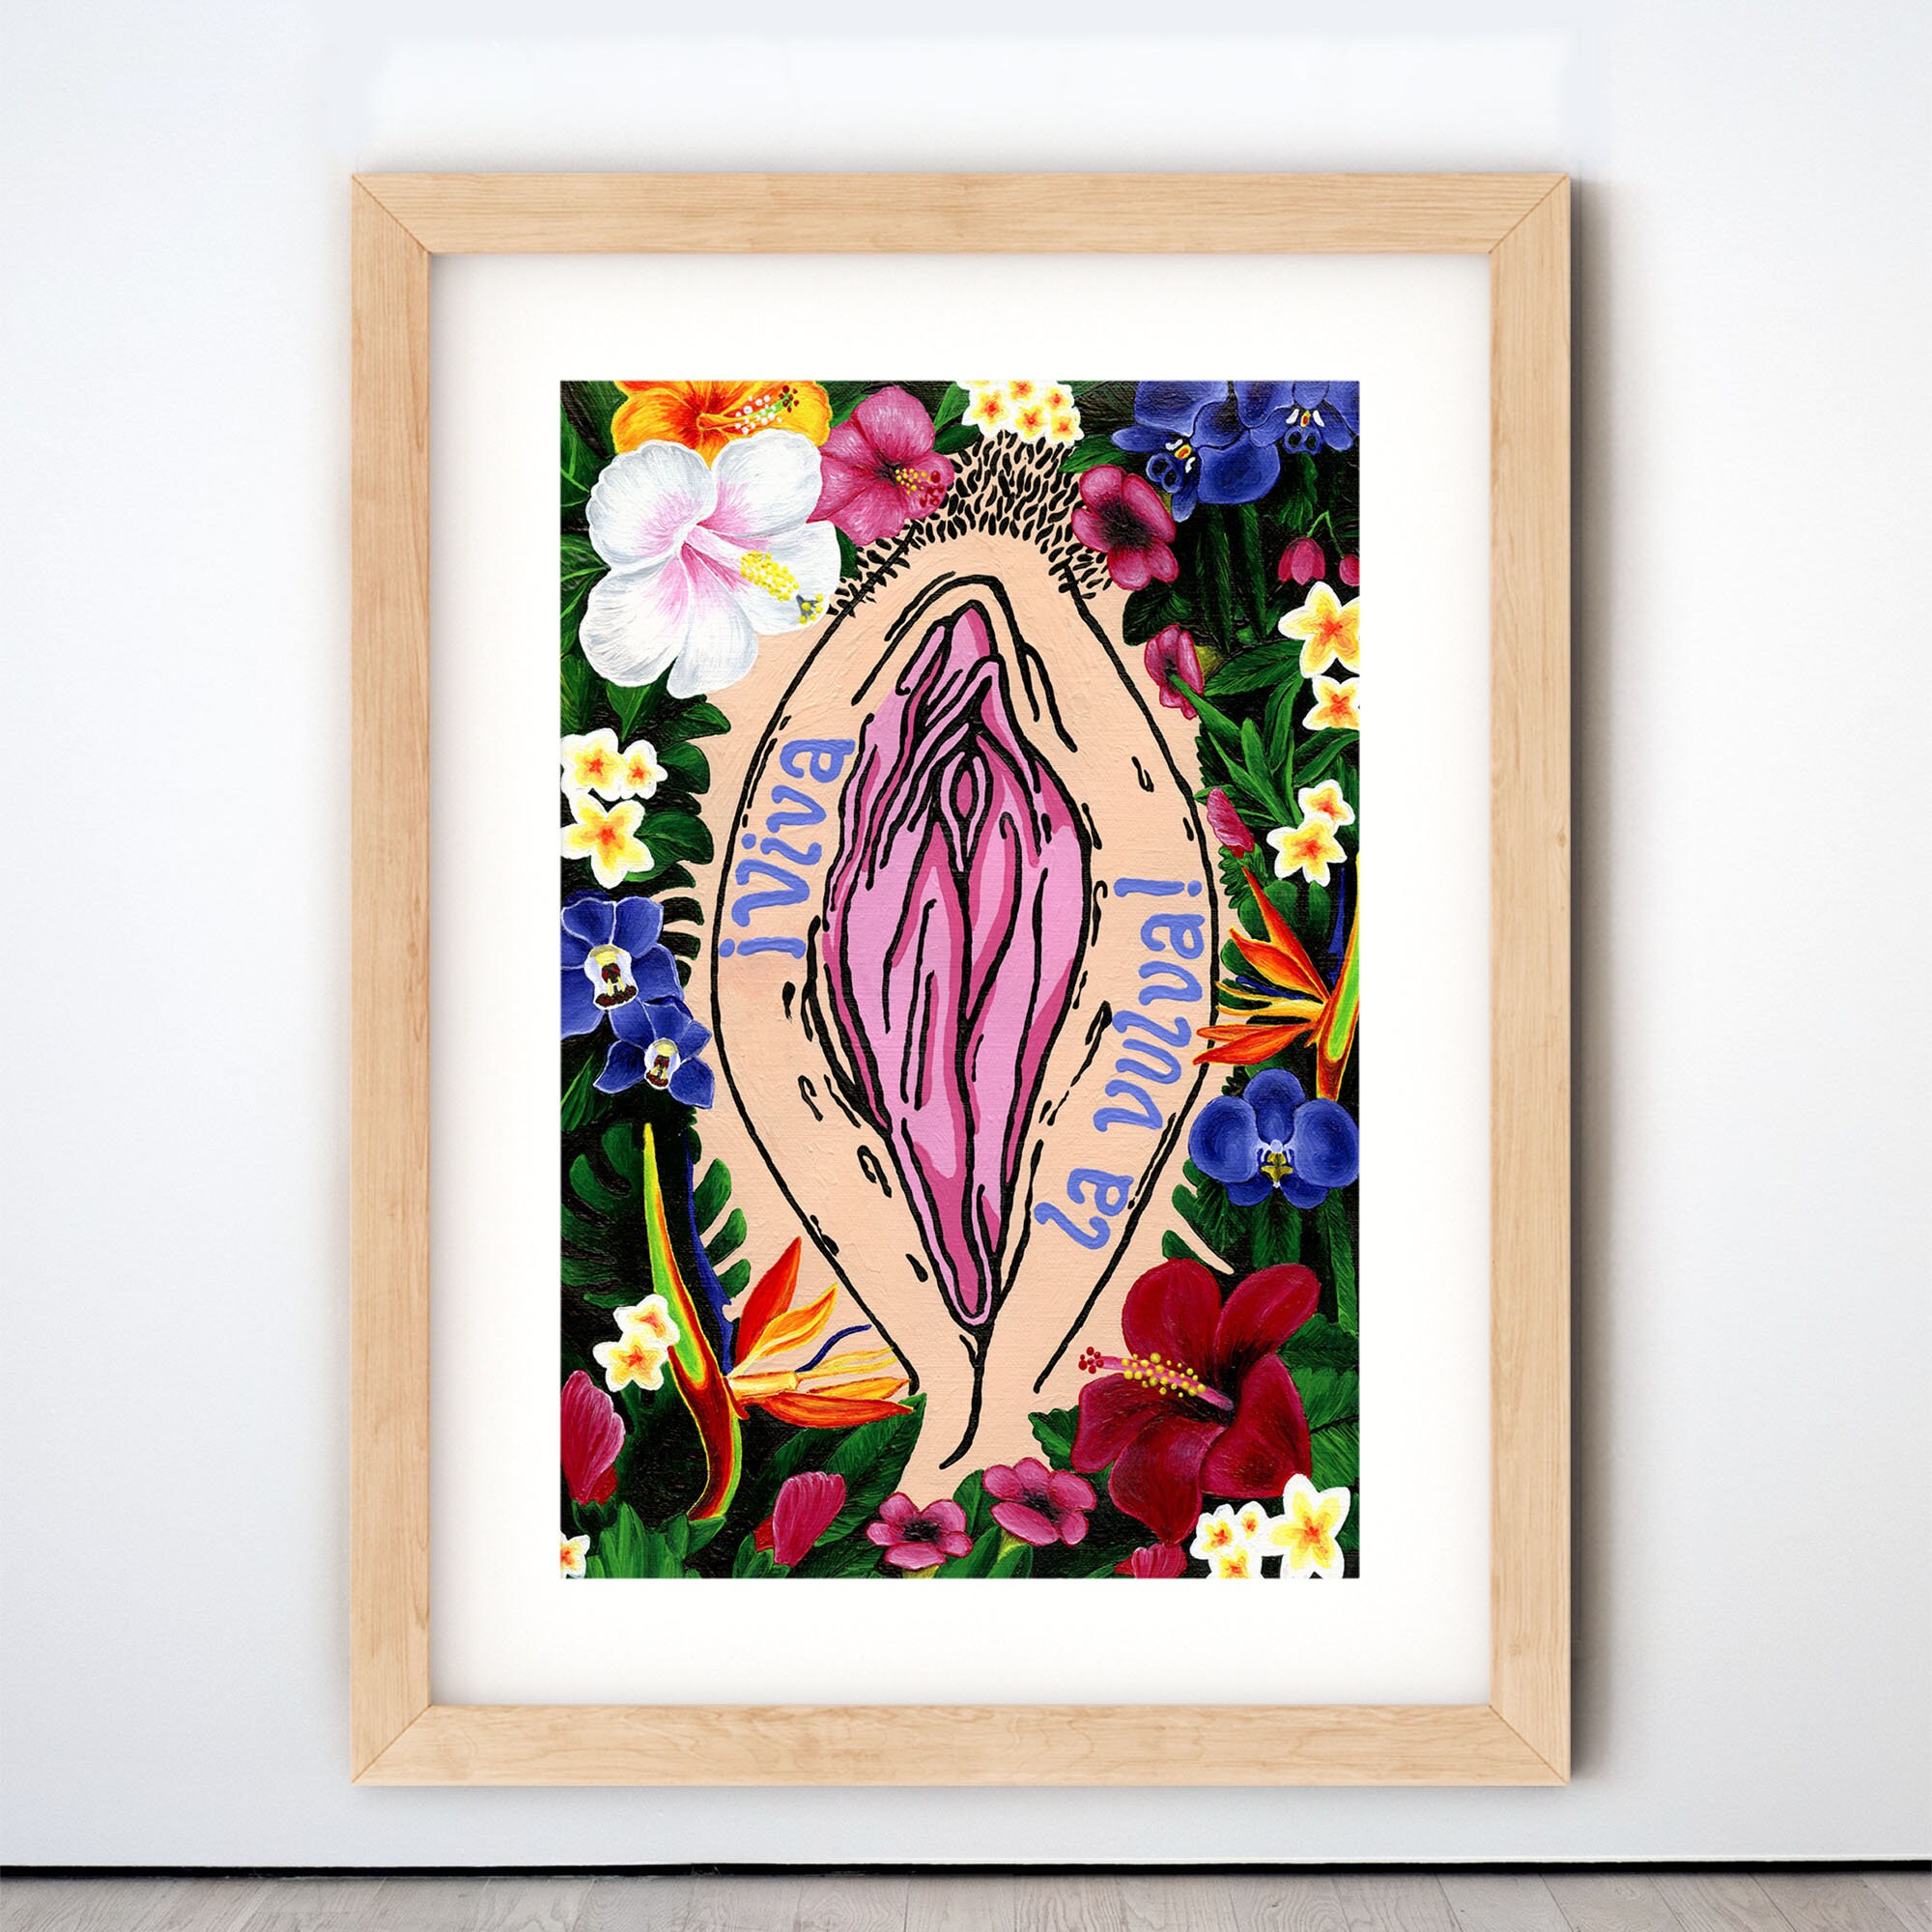 Body Positive Vulva Art Print feat 'Viva La Vulva' Protest Sign seen at Women's March for Reproductive Rights, Pro Choice Gift for Feminist